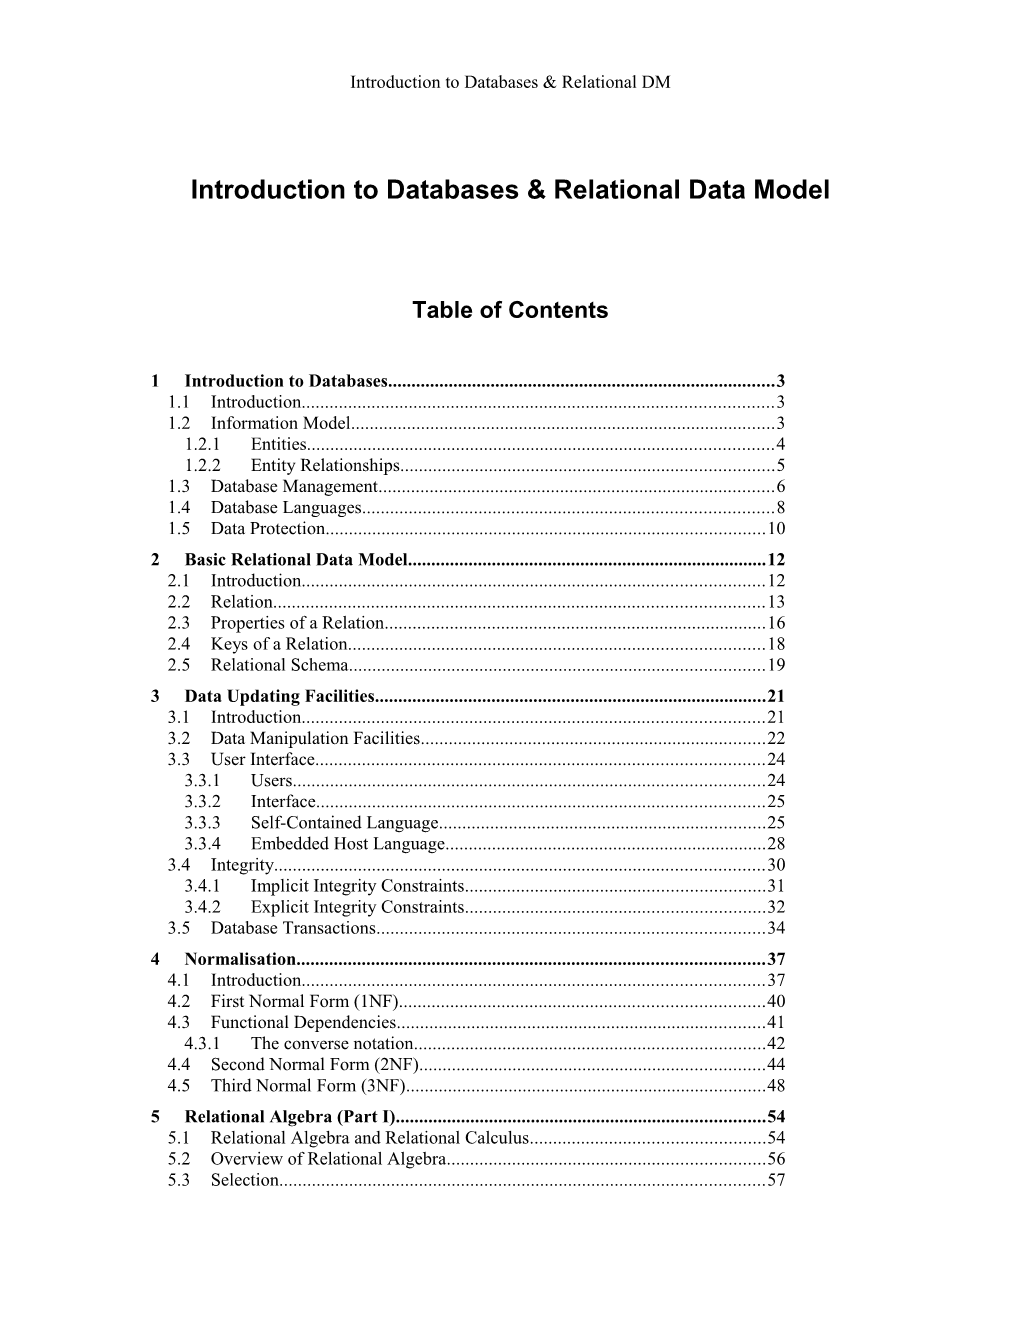 Introduction to Databases & Relational DM